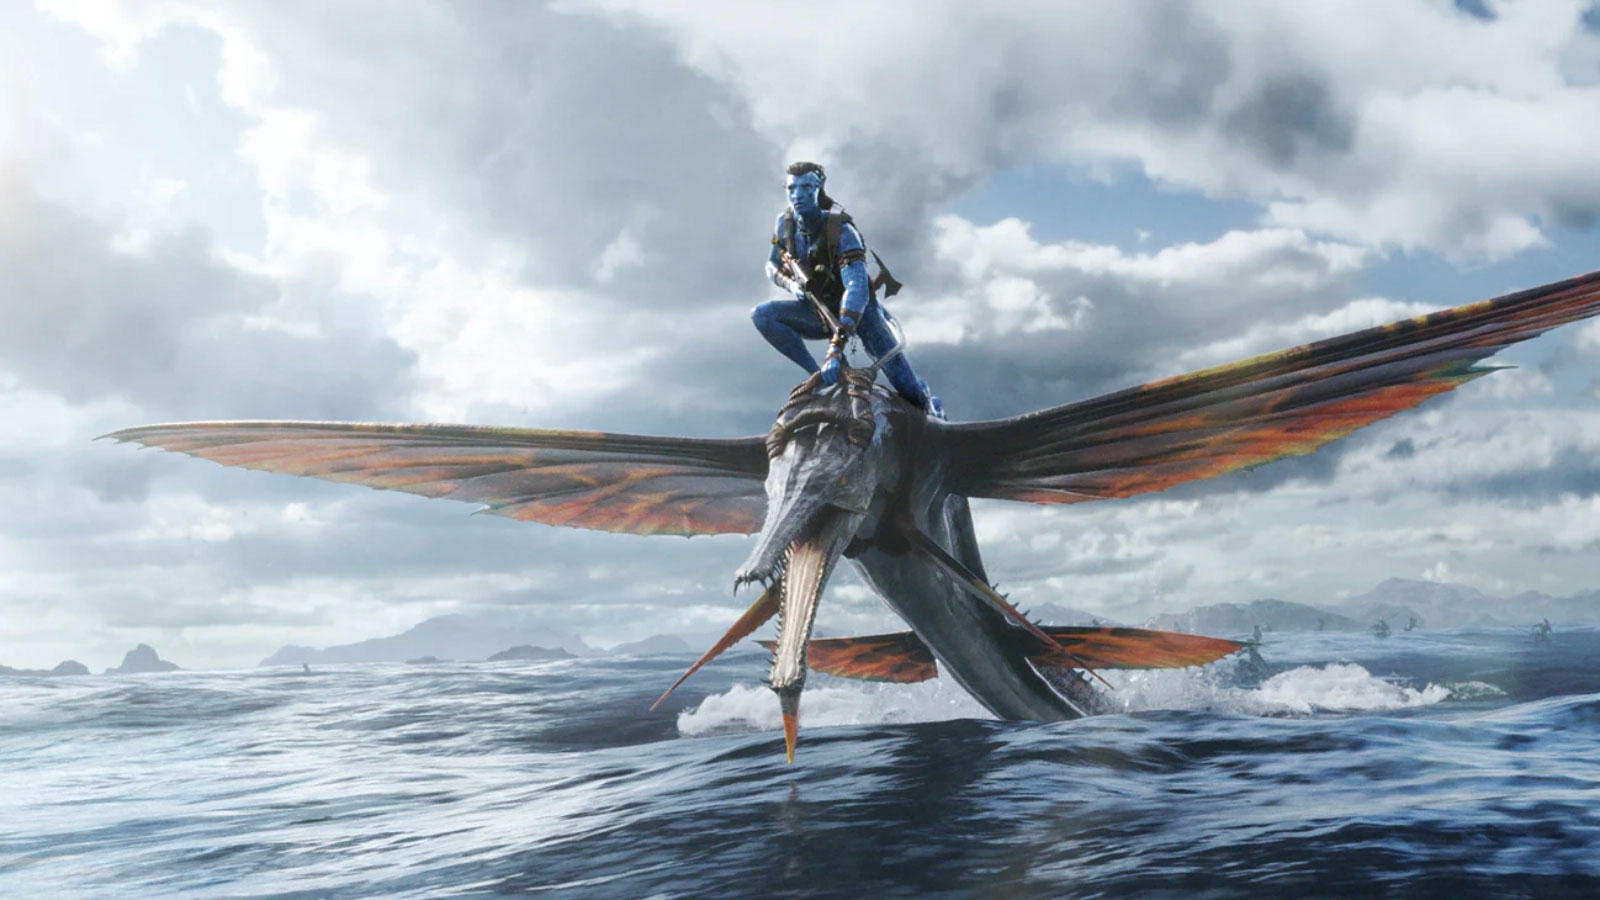 Screenshot from Avatar 2; a blue person riding a sea creature that looks like a cross between a flying fish and an alligator